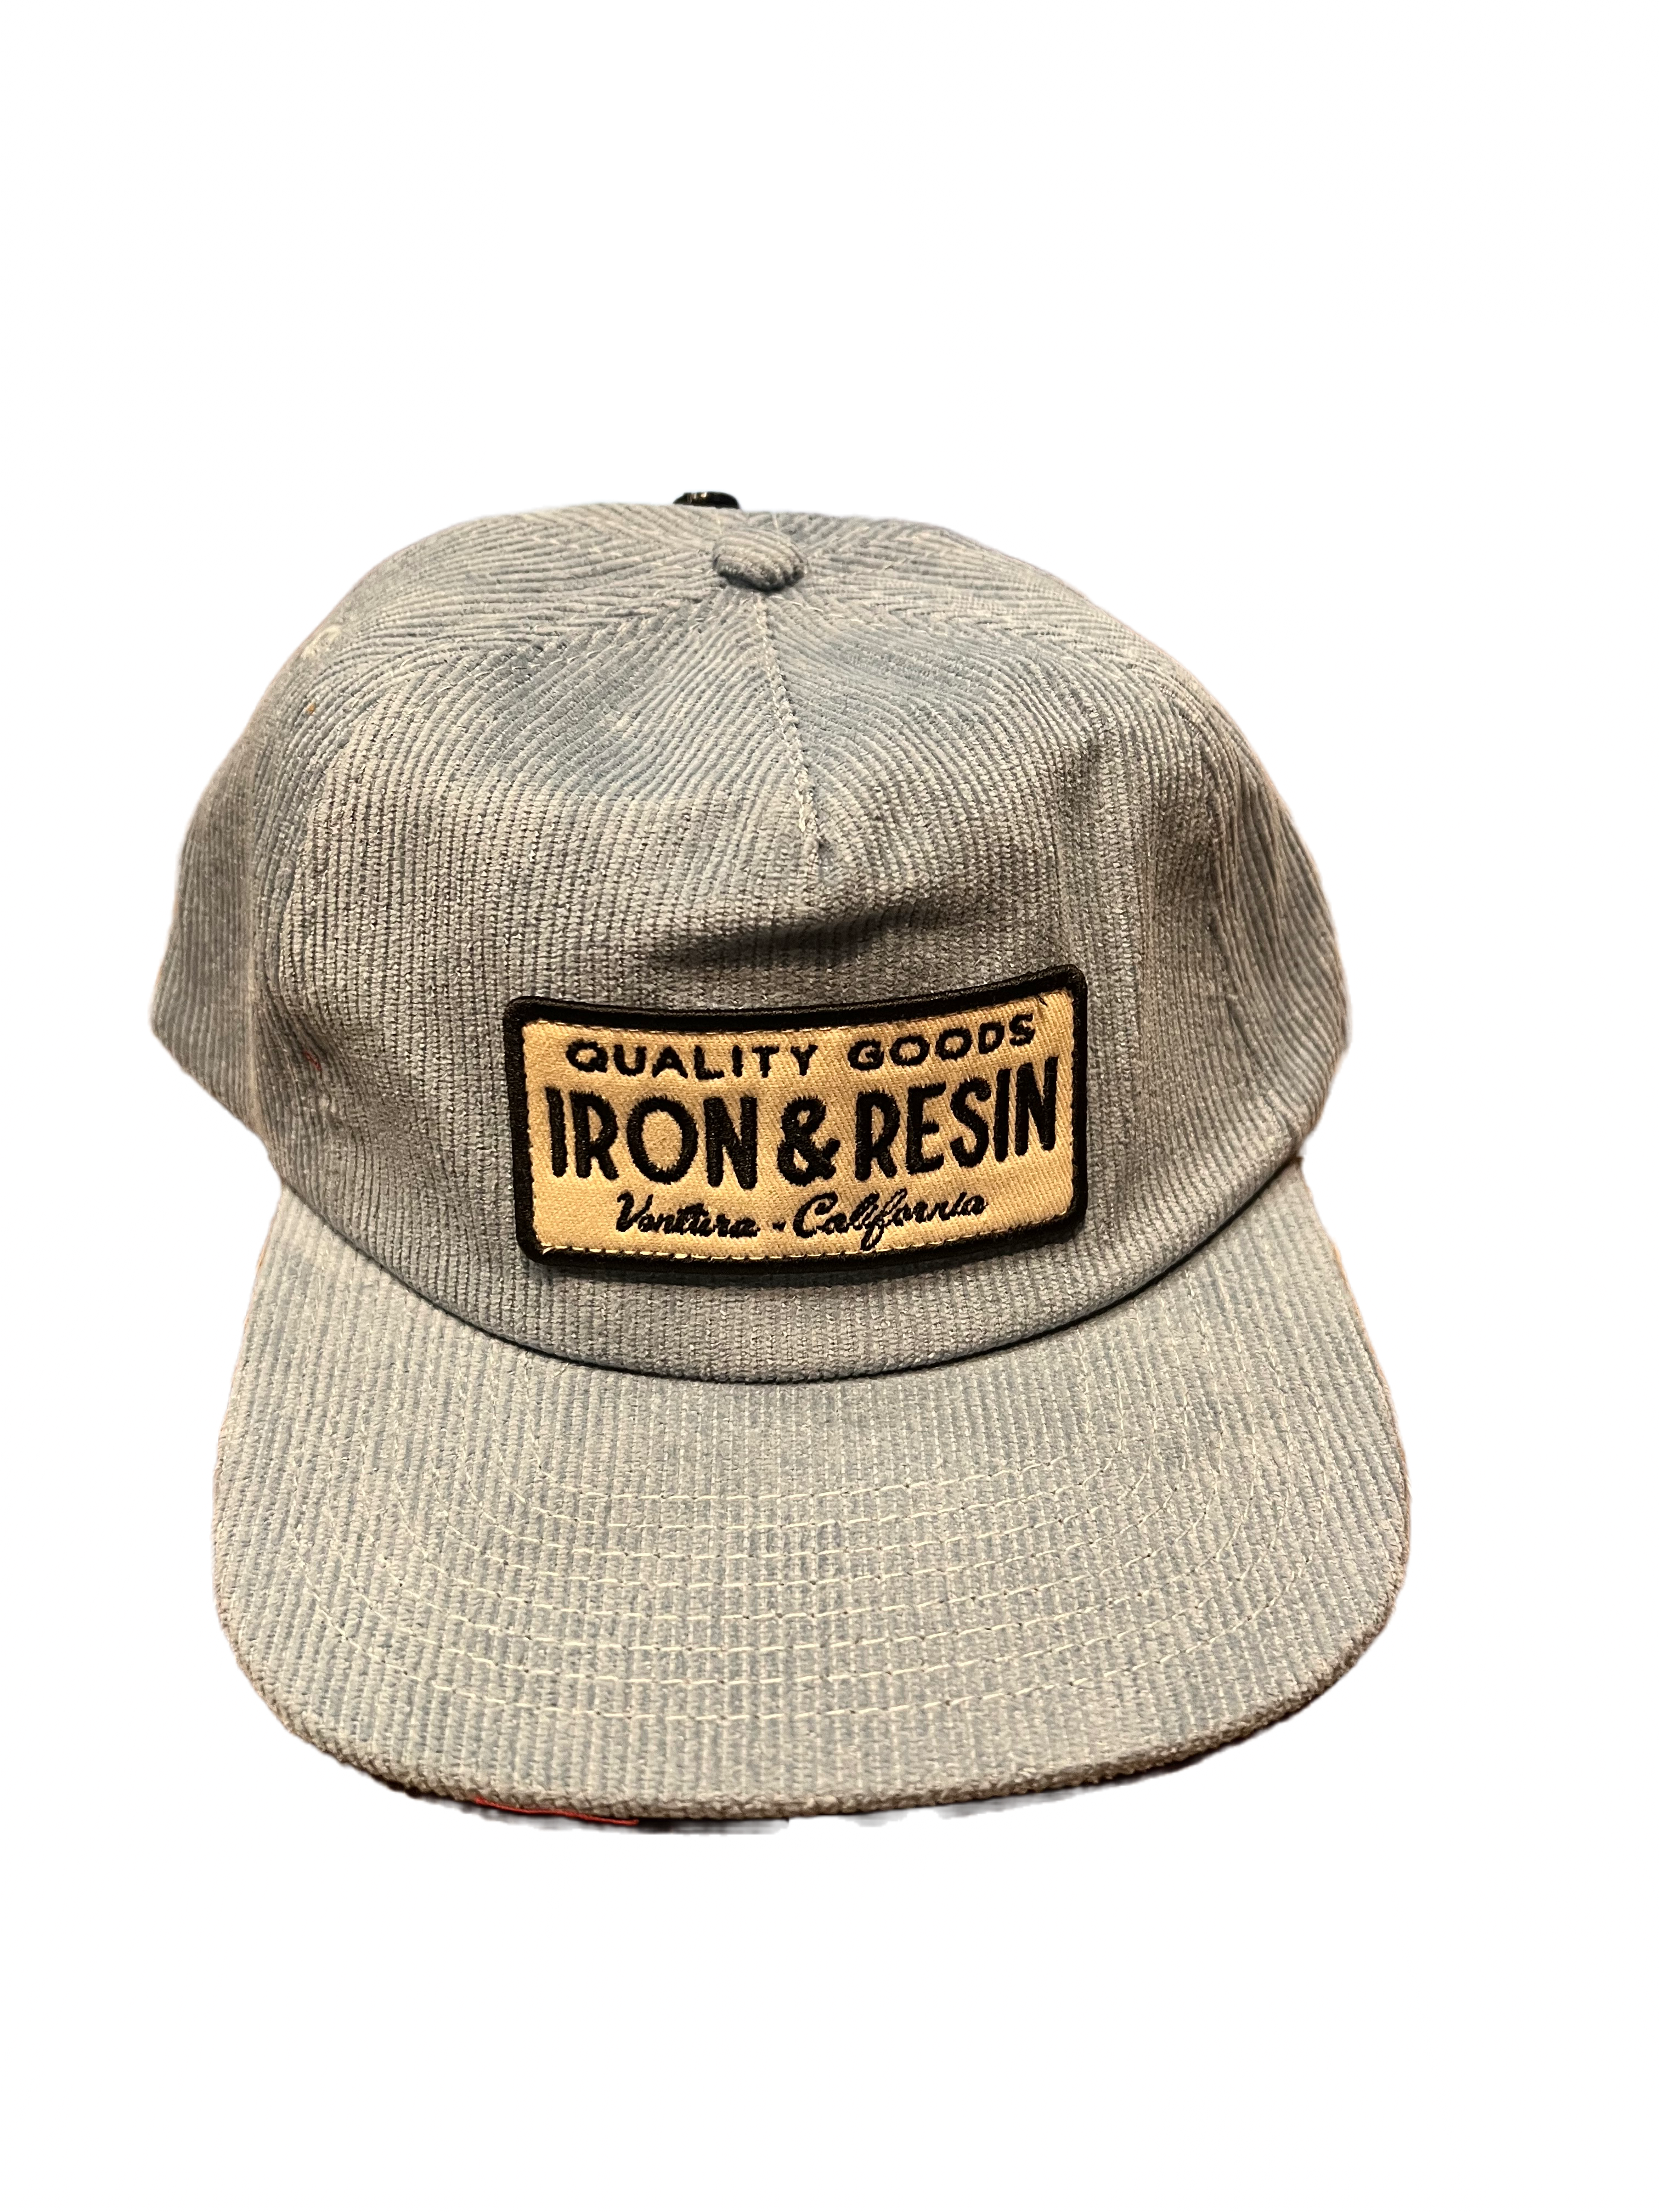 Iron & Resin Quality Goods Hat - Blue